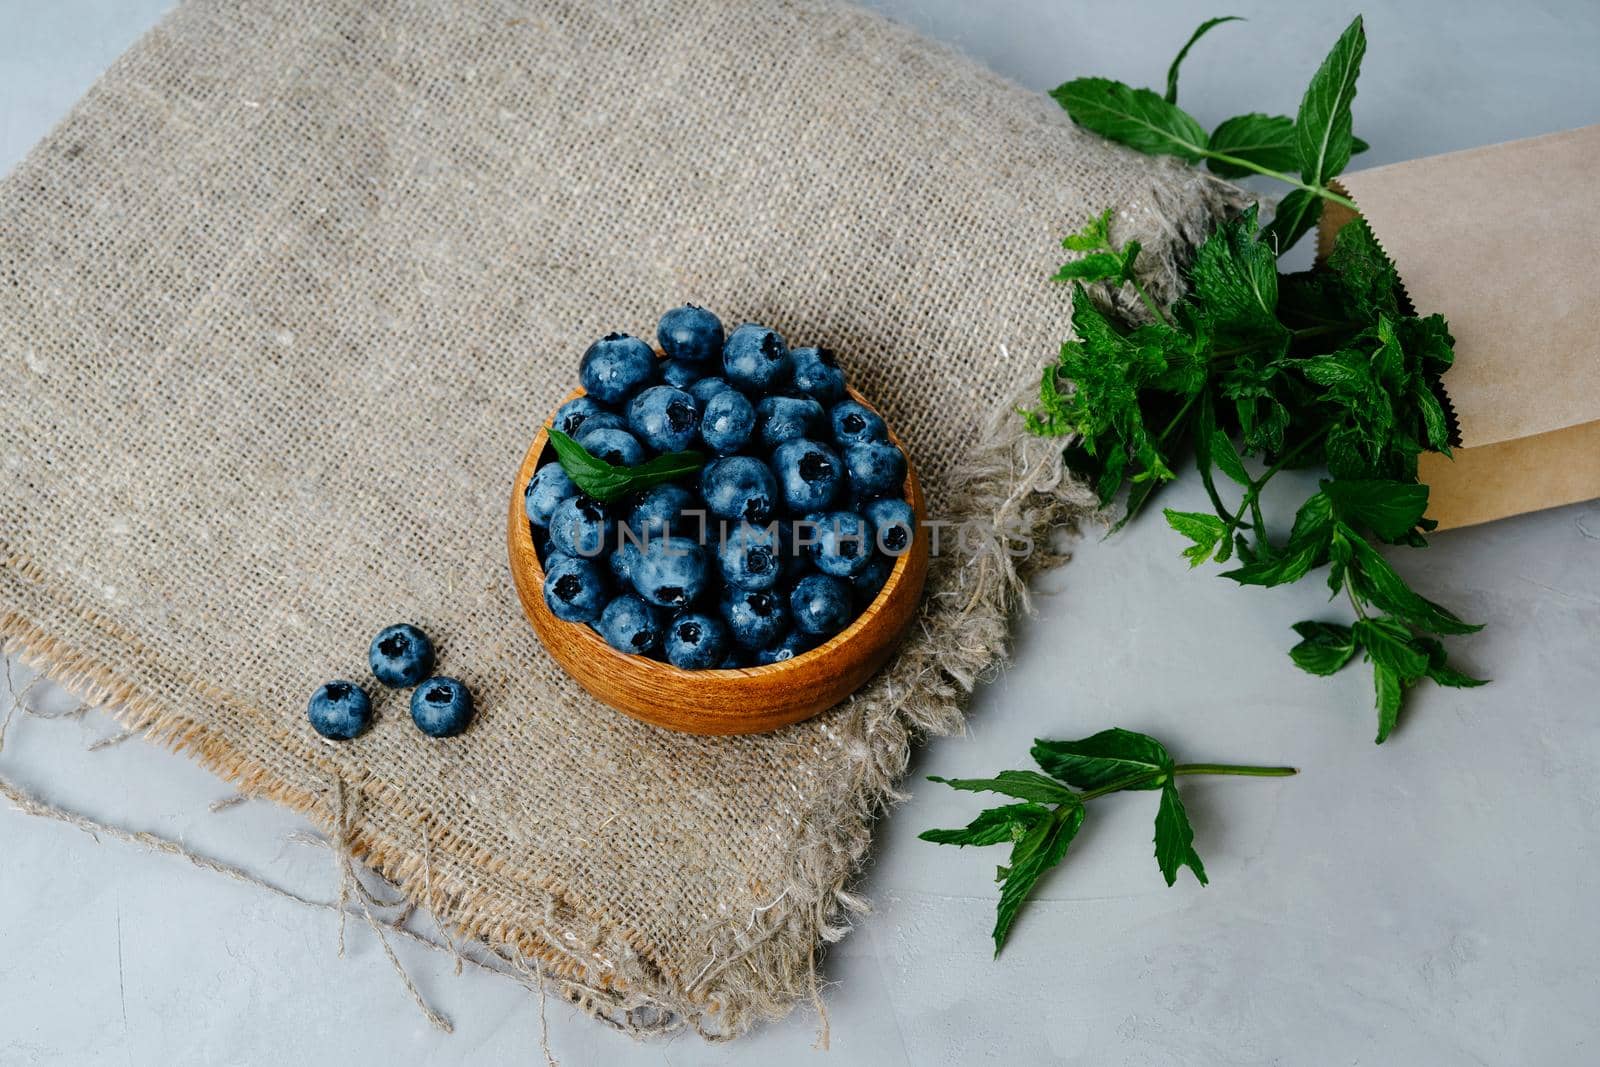 A small wooden bowl with berries. Juicy and ripe blueberries in an eco-friendly dish. Sprigs of fresh mint in a kraft bag. The concept of healthy eating and nutrition. Drops of water on blueberries.